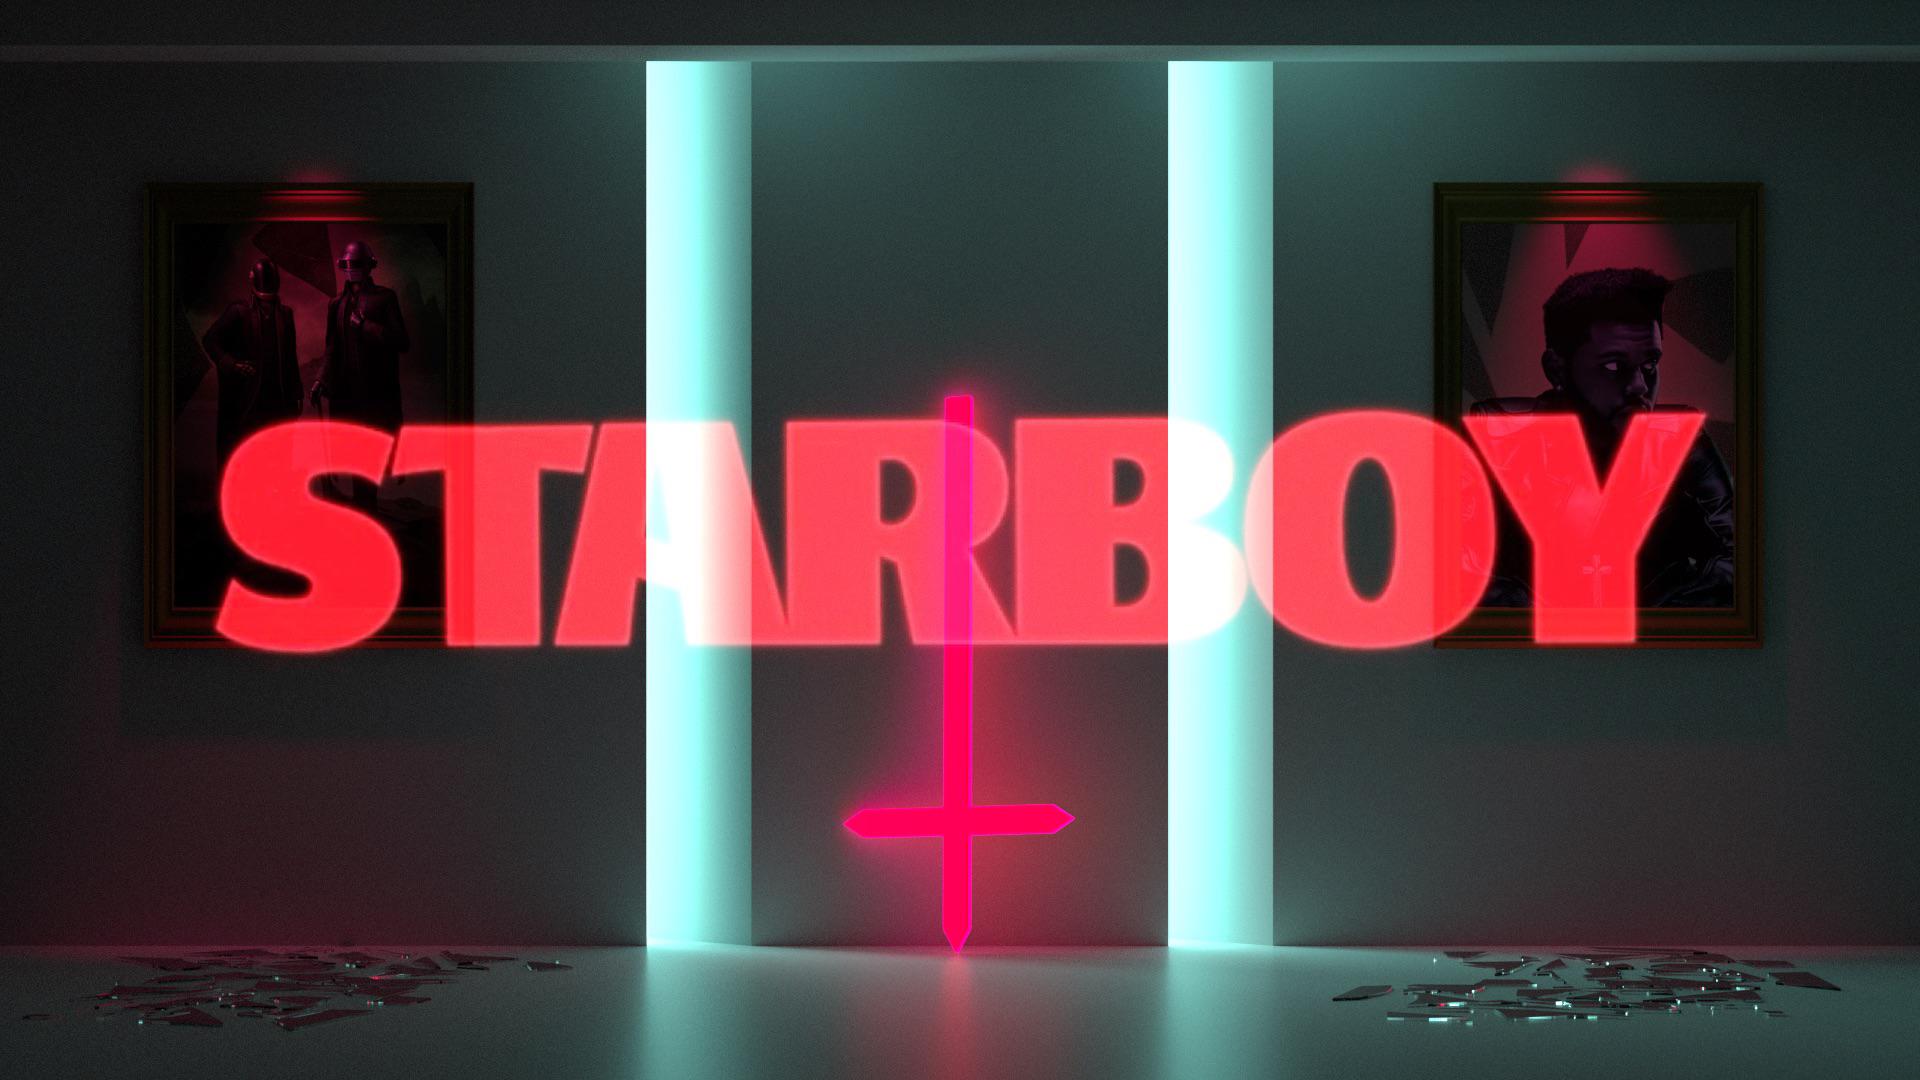 Starboy Wallpapers